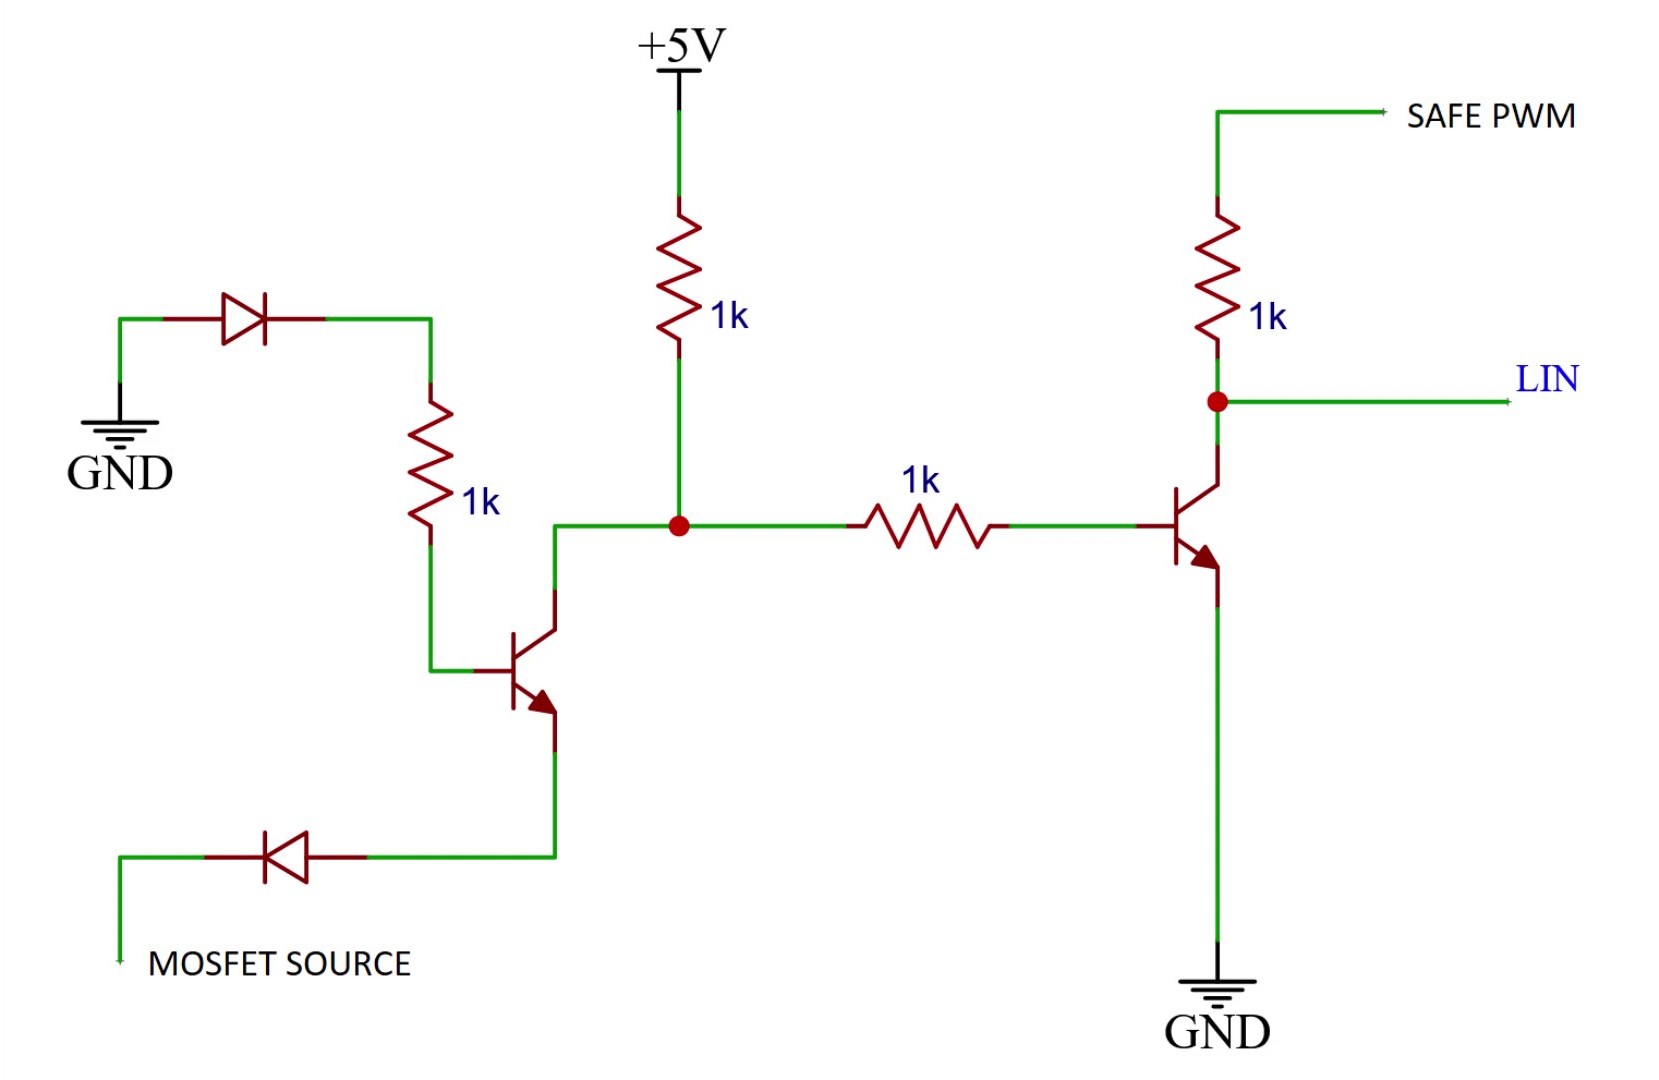 Circuit for detecting voltage over ideal-diode, this has to be AND-ed with the safe signal (top signal is low)